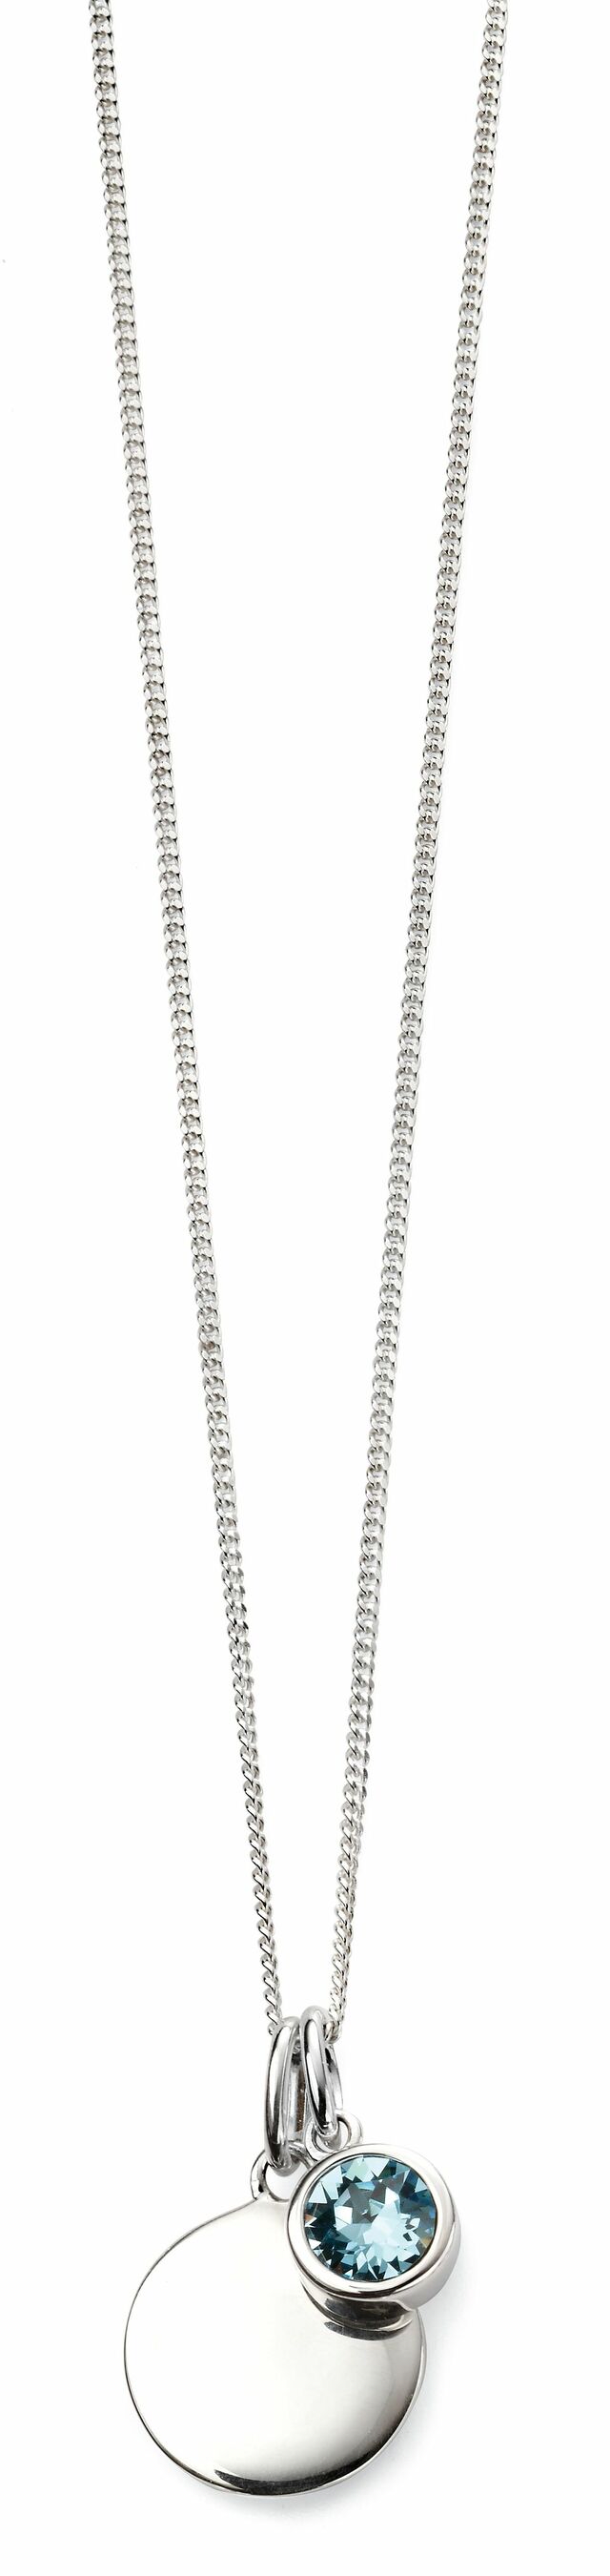 March Silver and Crystals Birthstone Necklace - NB1004 - Hallmark Jewellers Formby & The Jewellers Bench Widnes